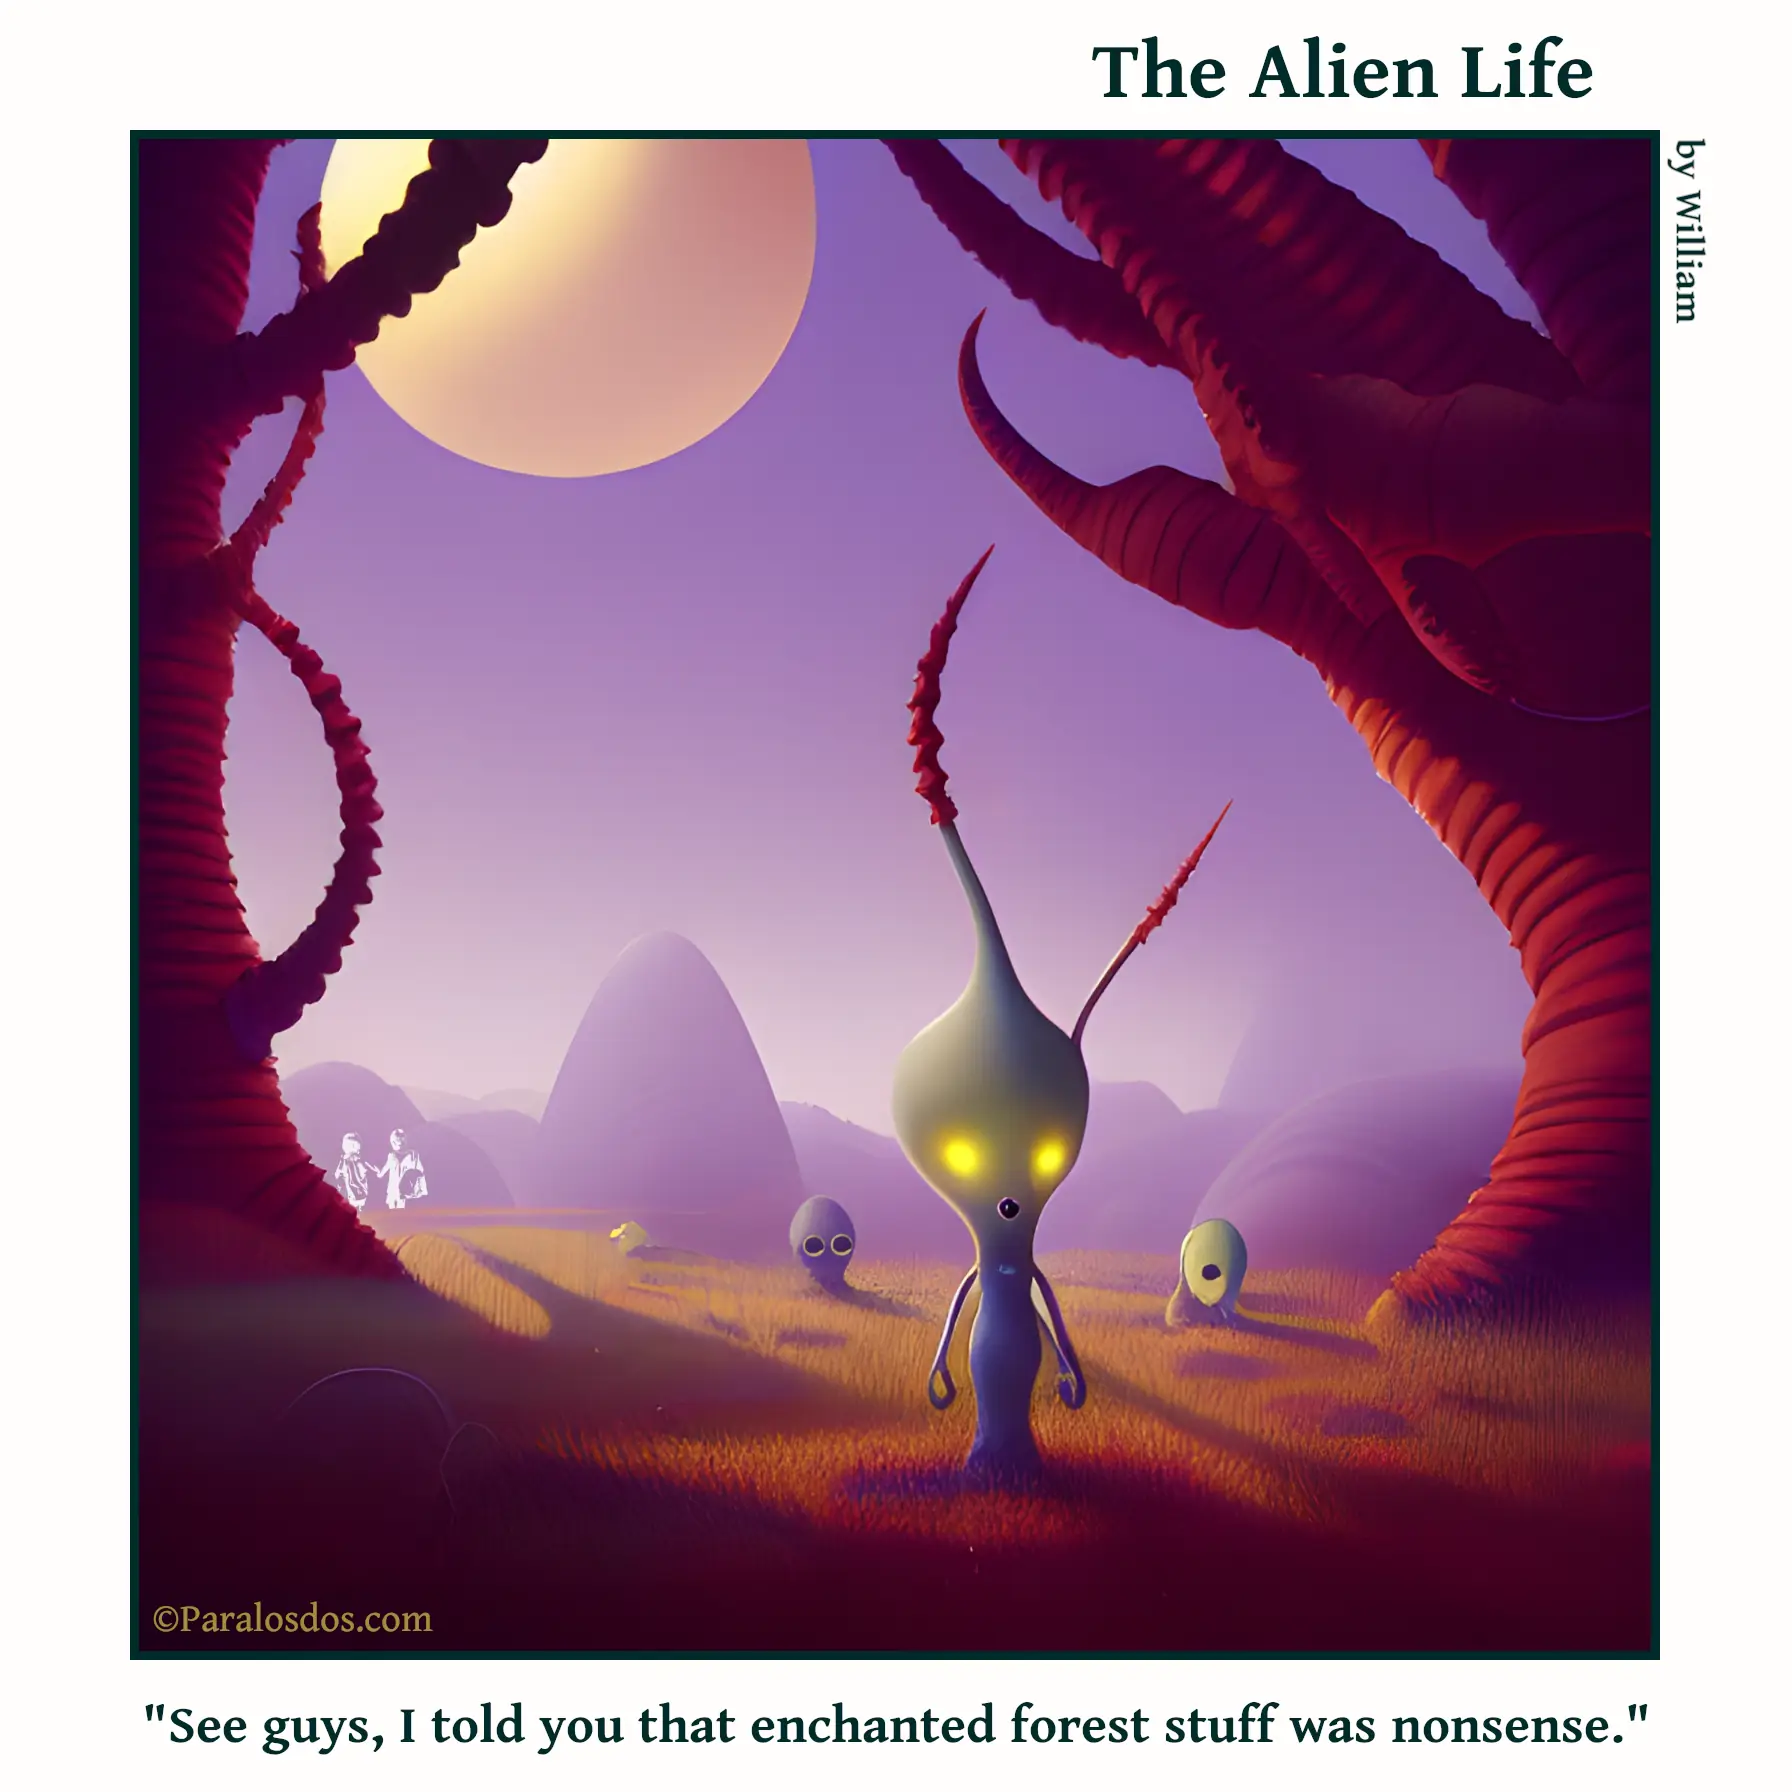 The Alien Life, one panel Comic. One alien is ahead of other aliens, just entering a forest. His eyes have started glowing, and his head has started growing branches the same colour as the branches in the forest. The caption reads: "See guys, I told you that enchanted forest stuff was nonsense."